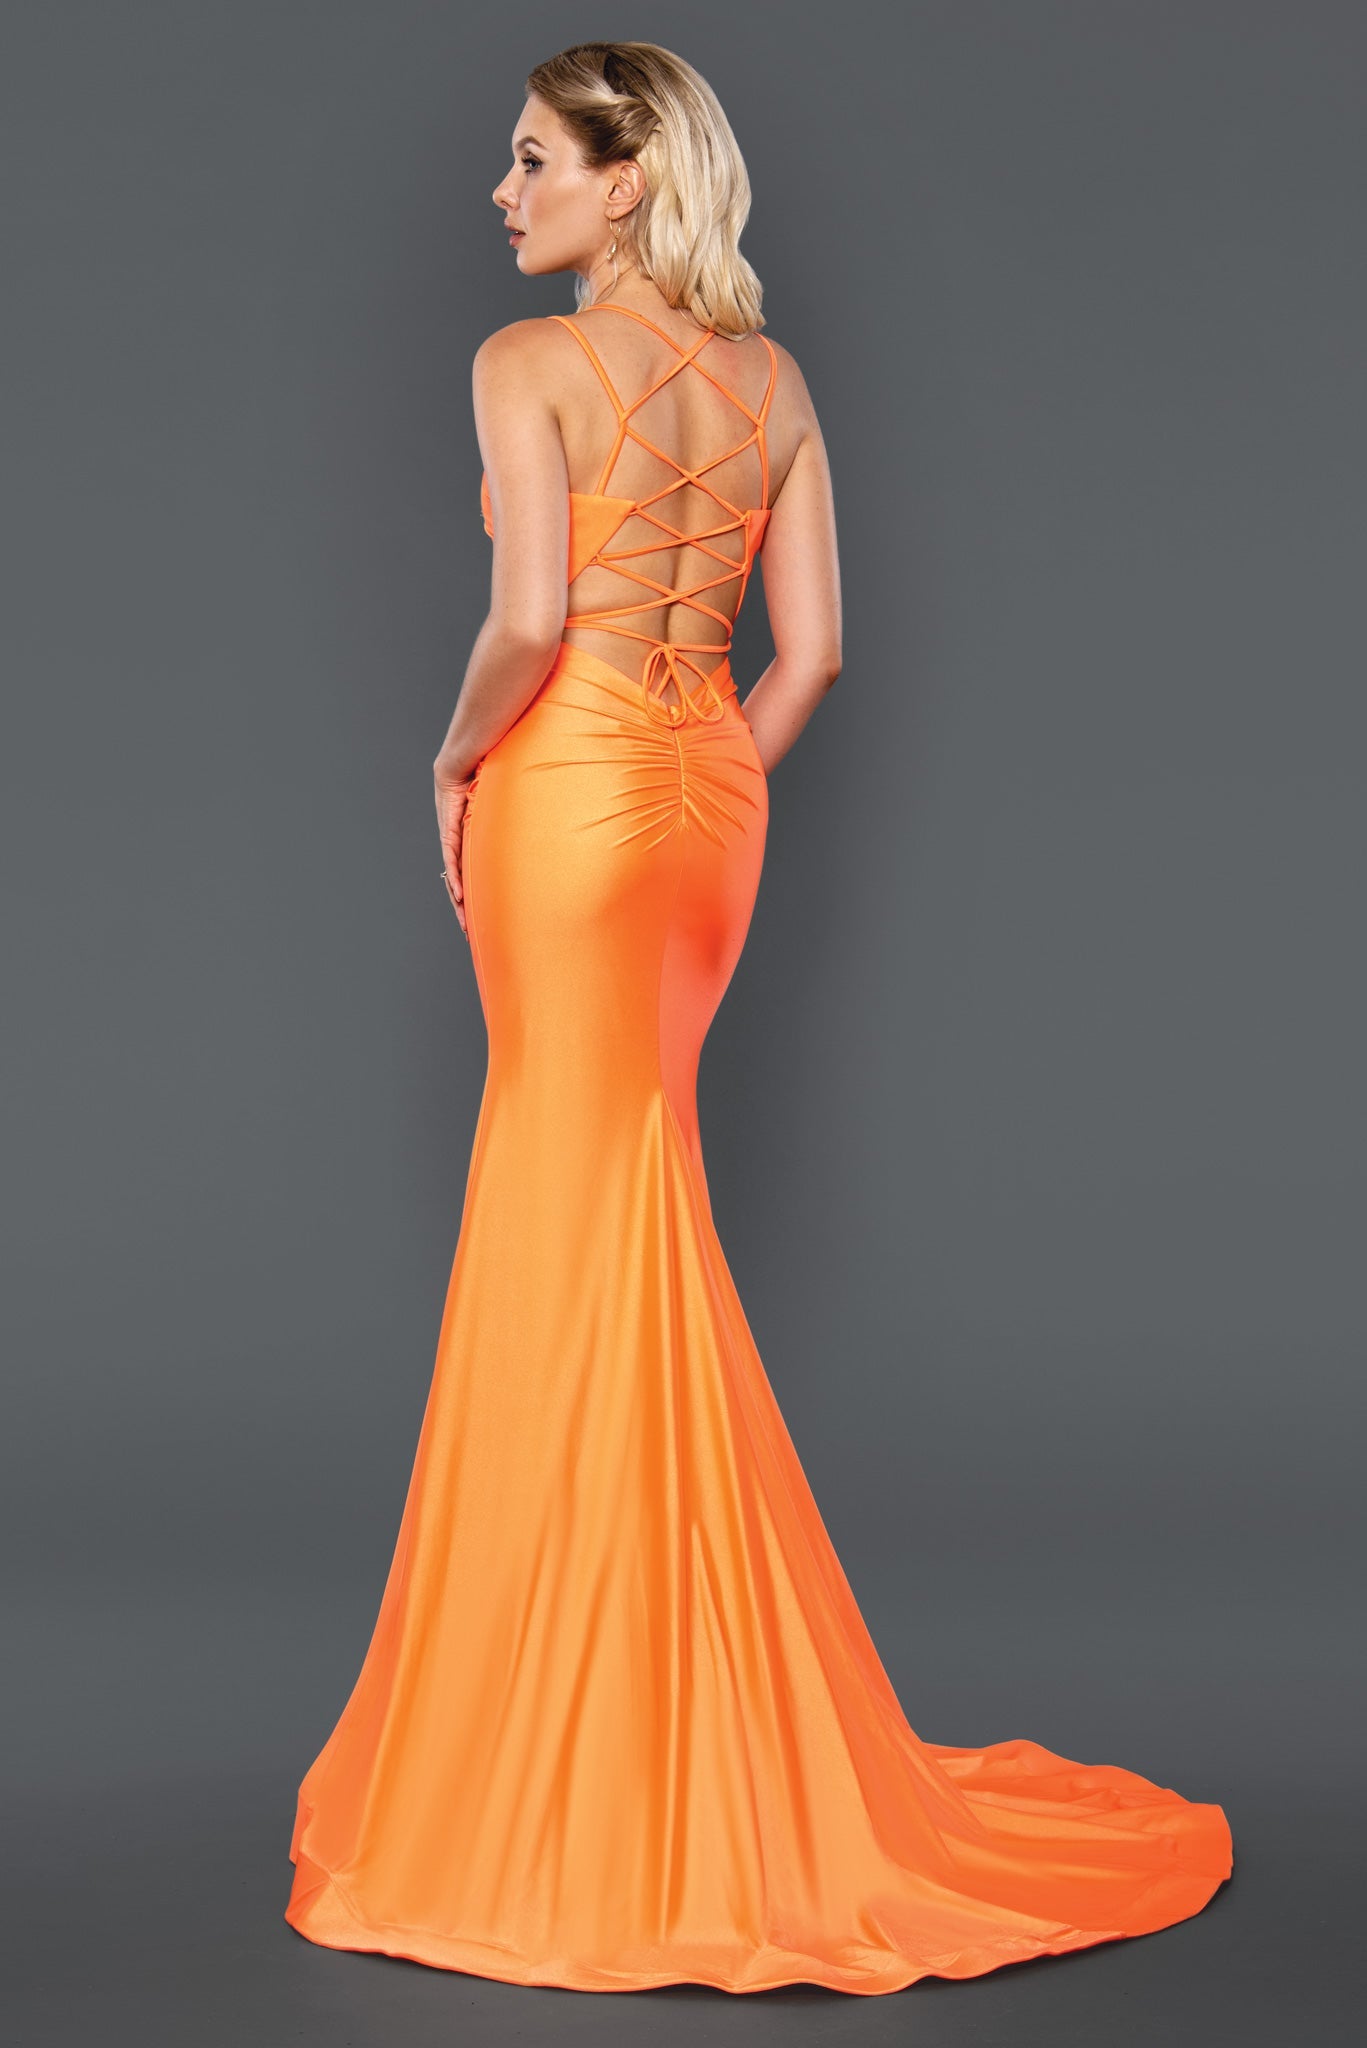 Stella Couture 22039 Long Fitted Formal Dress Prom Gown Backless unique Corset lace up. Ruched butt with sweeping train  Available Size: 0-12  Available Color: Lilac, Orange